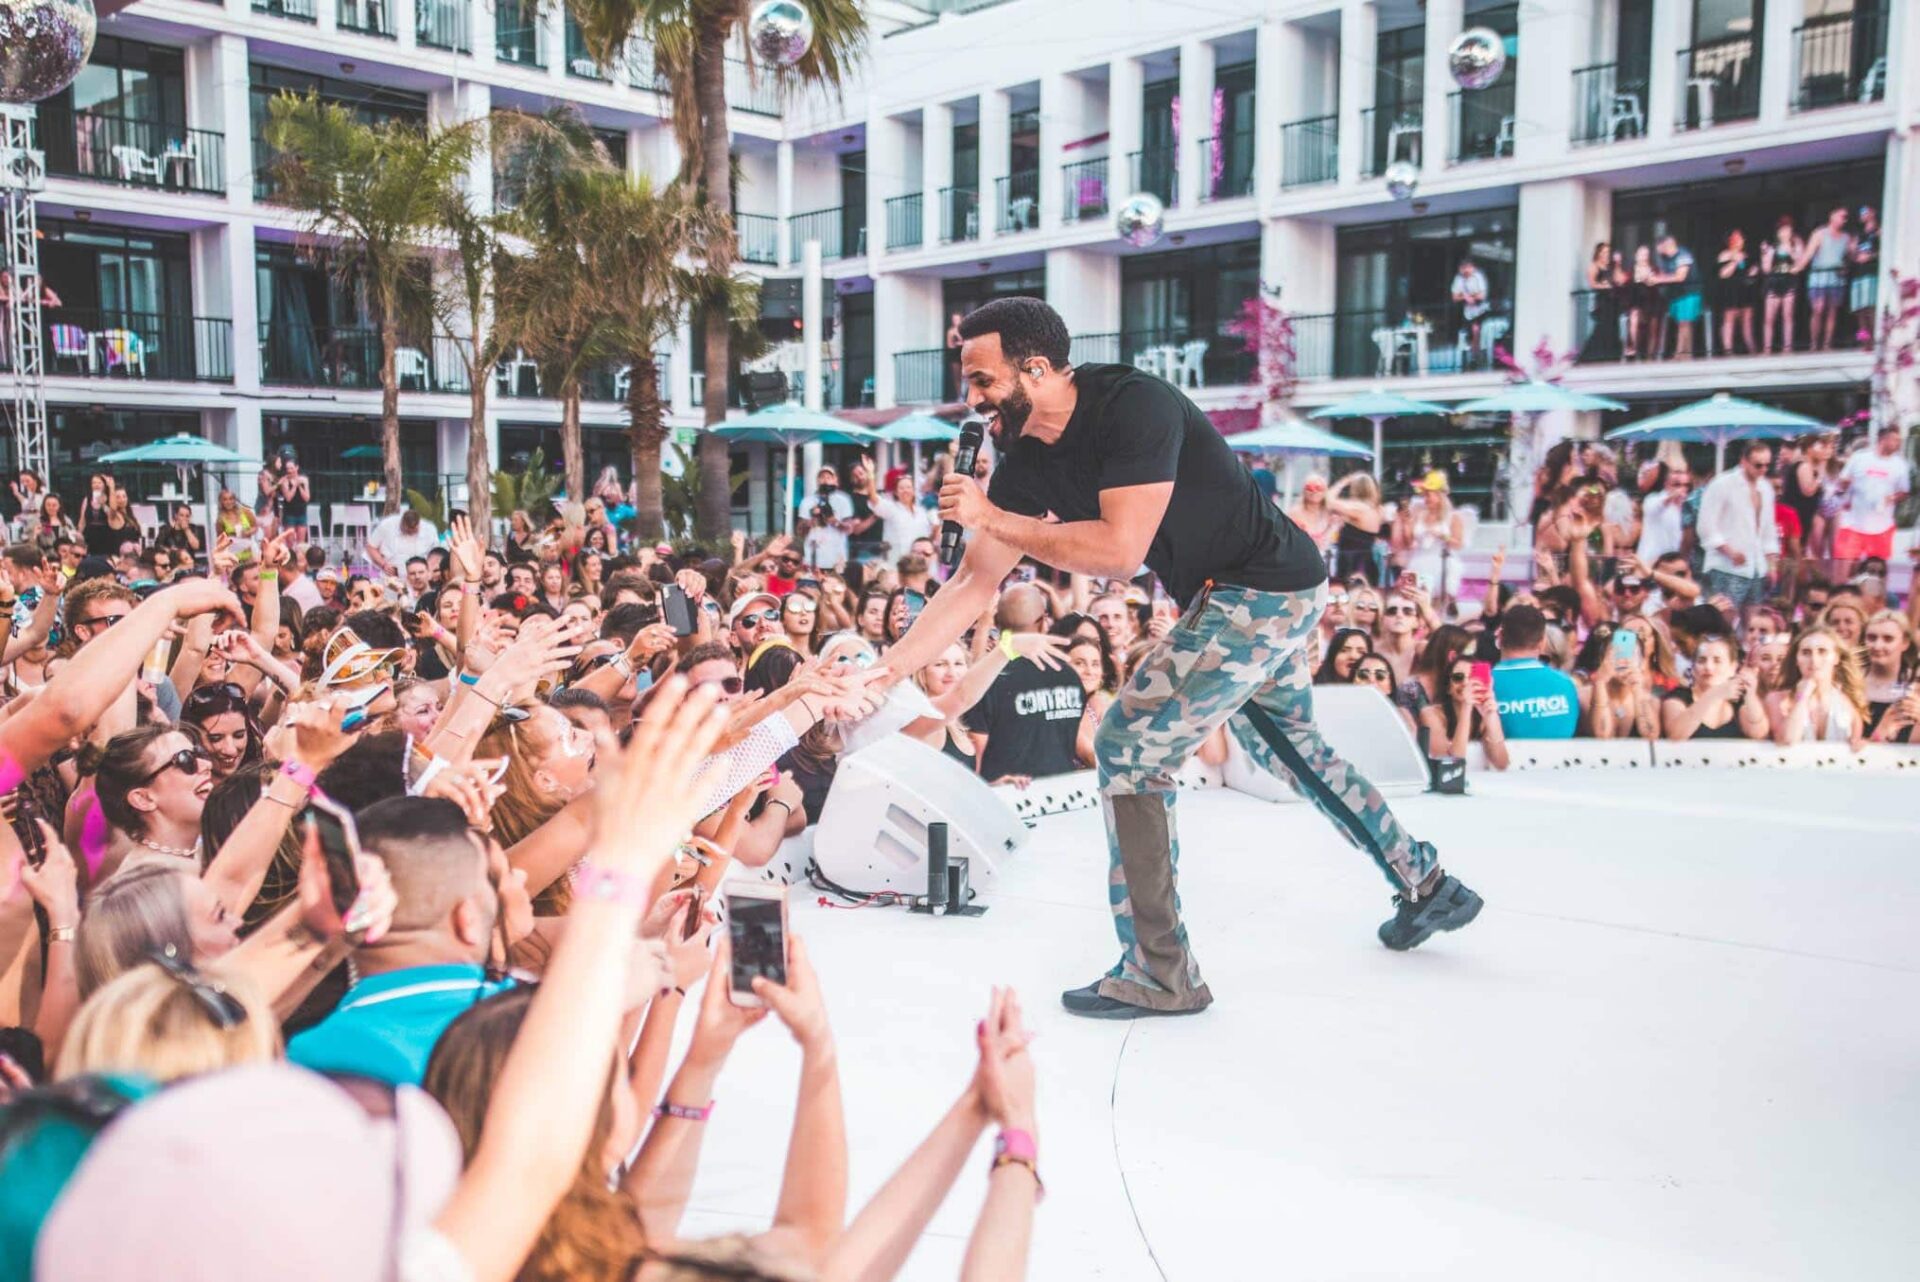 craig dvaid grab fans hands from stages at ibiza rocks